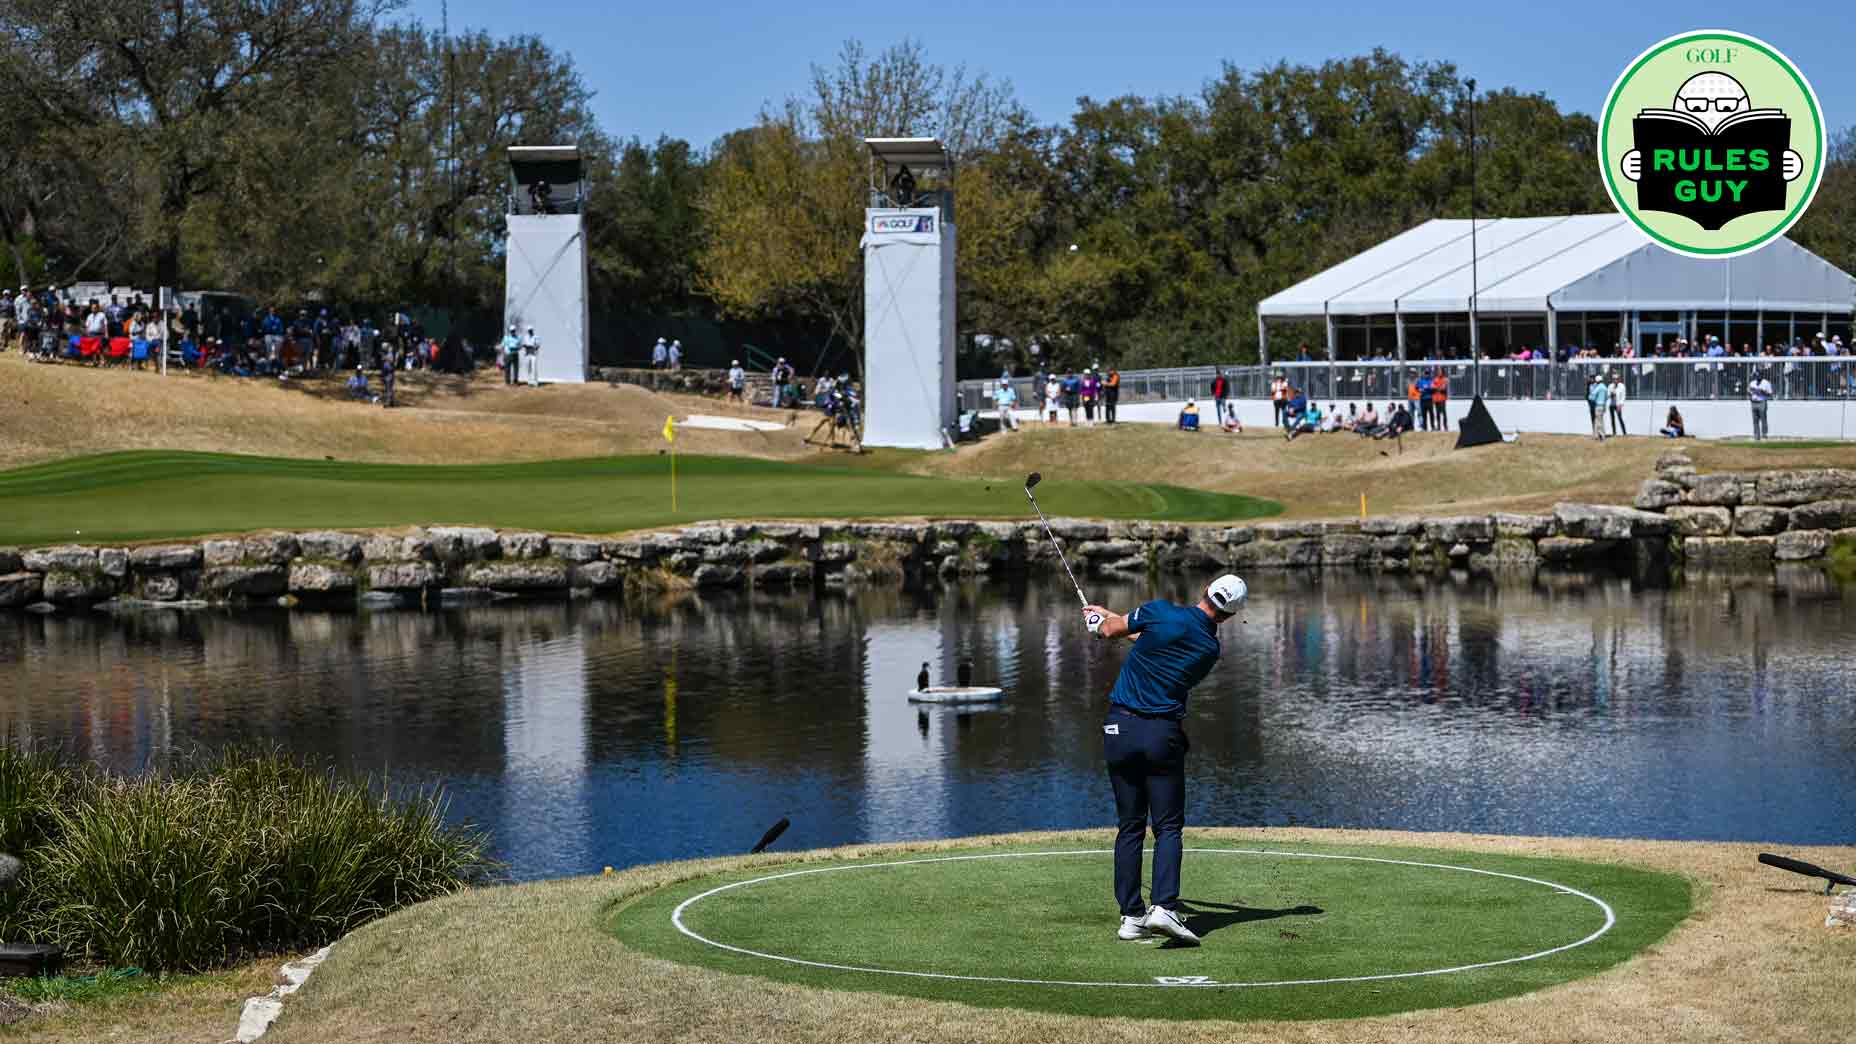 Viktor Hovland of Norway hits from the drop zone on the 11th hole after taking a penalty during the first round of the World Golf Championships-Dell Technologies Match Play at Austin Country Club on March 23, 2022 in Austin, Texas